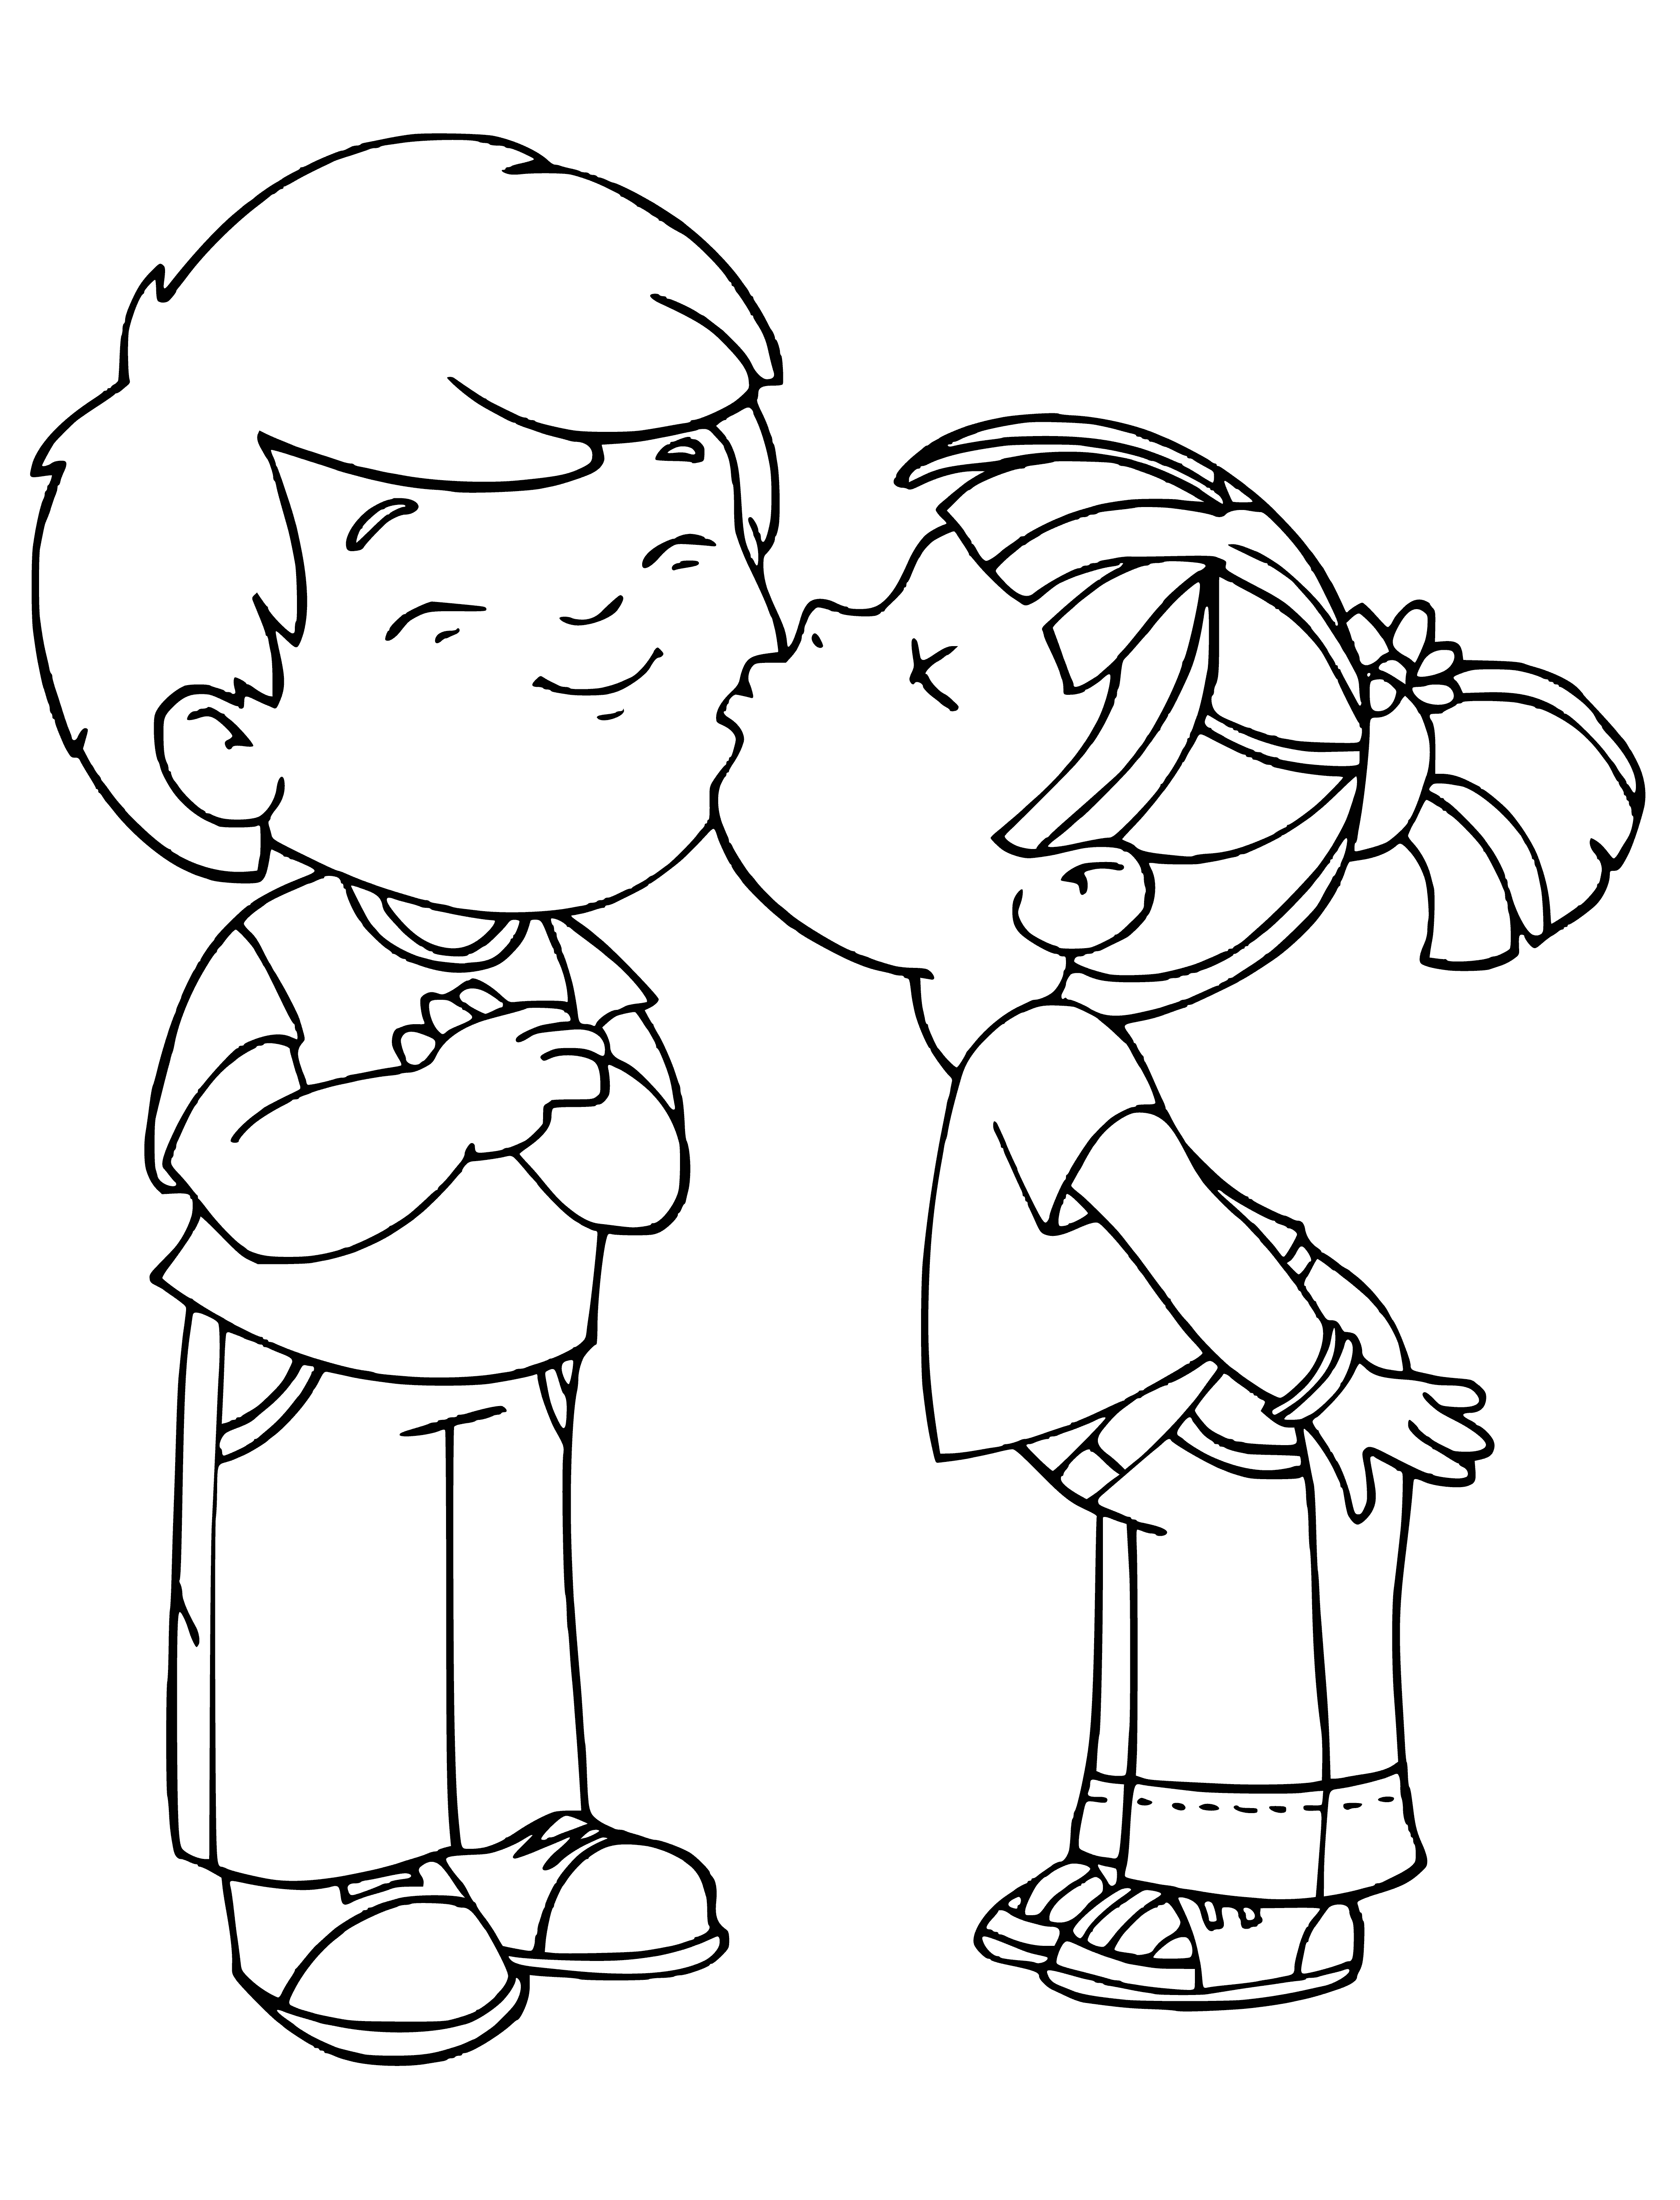 coloring page: => Two people close together, eyes closed, heads tilted - they look like they're about to kiss! #love